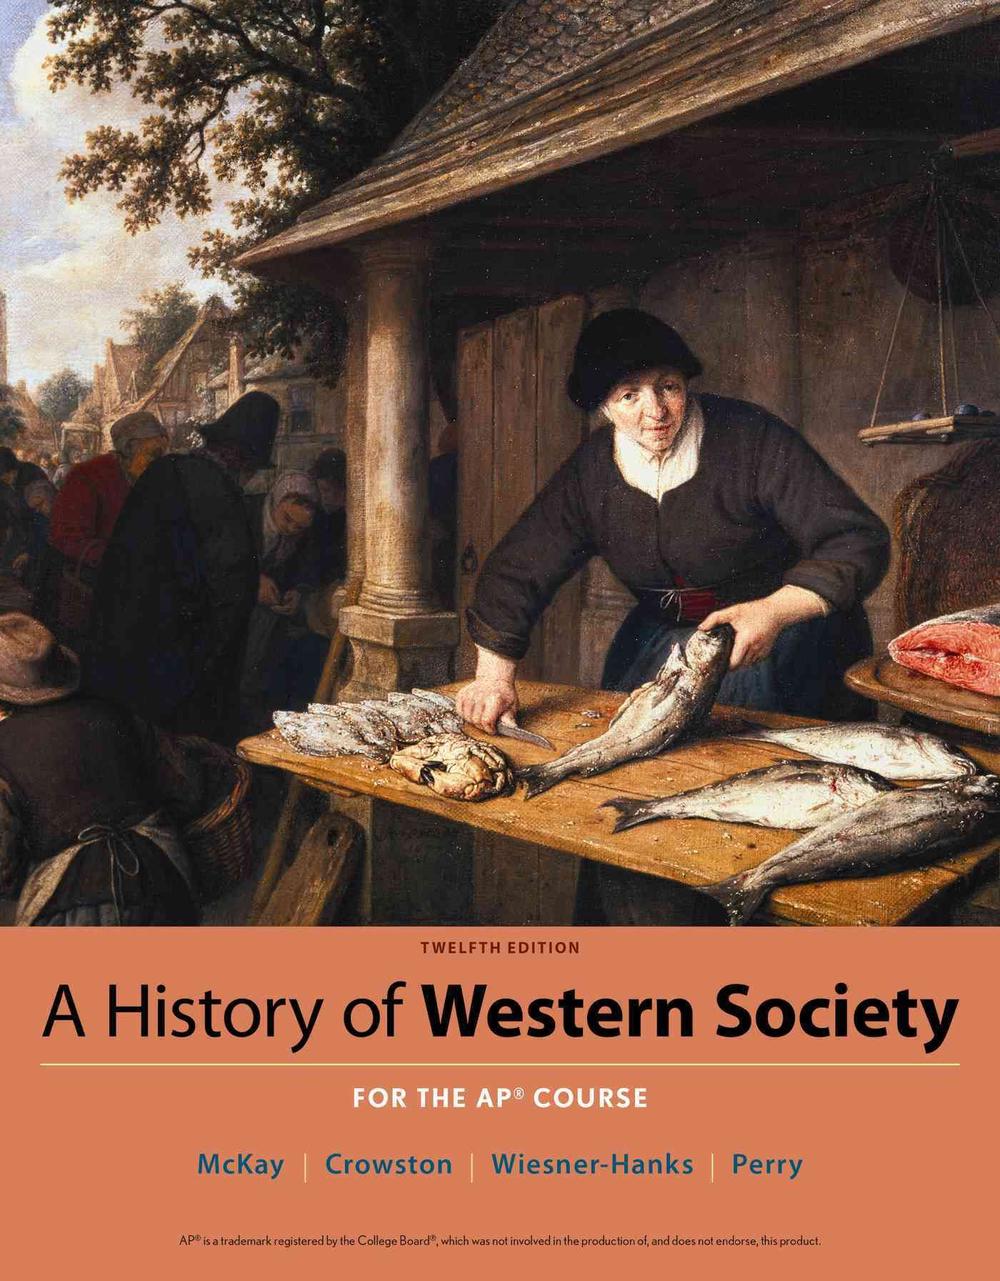 A History of Western Society Since 1300 for Ap(r) by John P. McKay